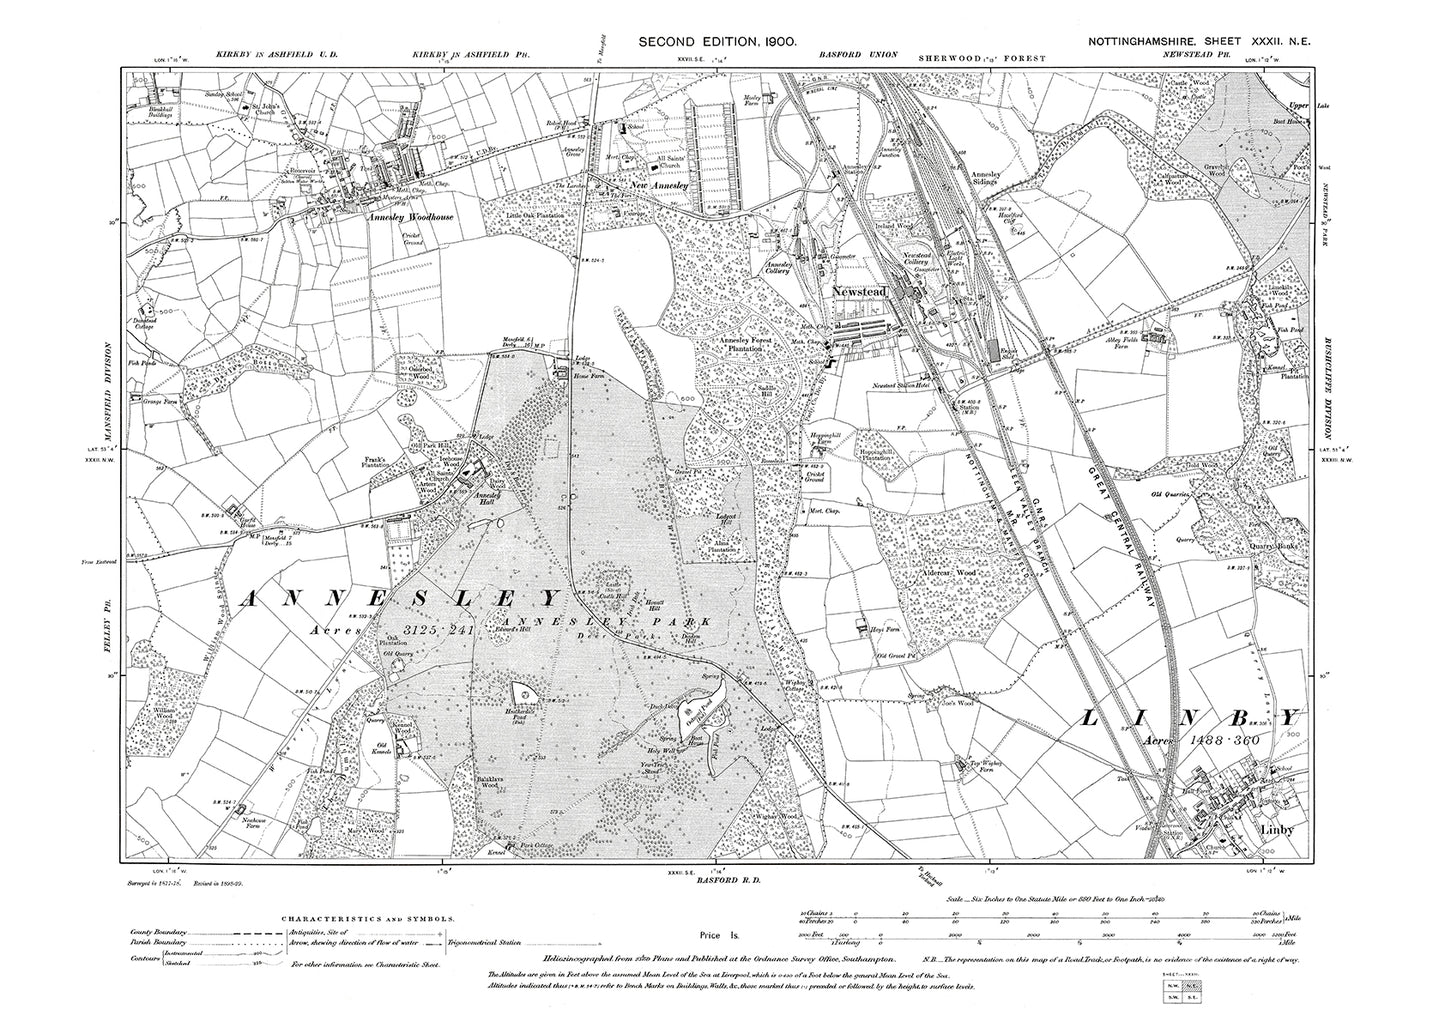 Annesley, Newstead, Linby, old map Nottinghamshire 1900: 32NE